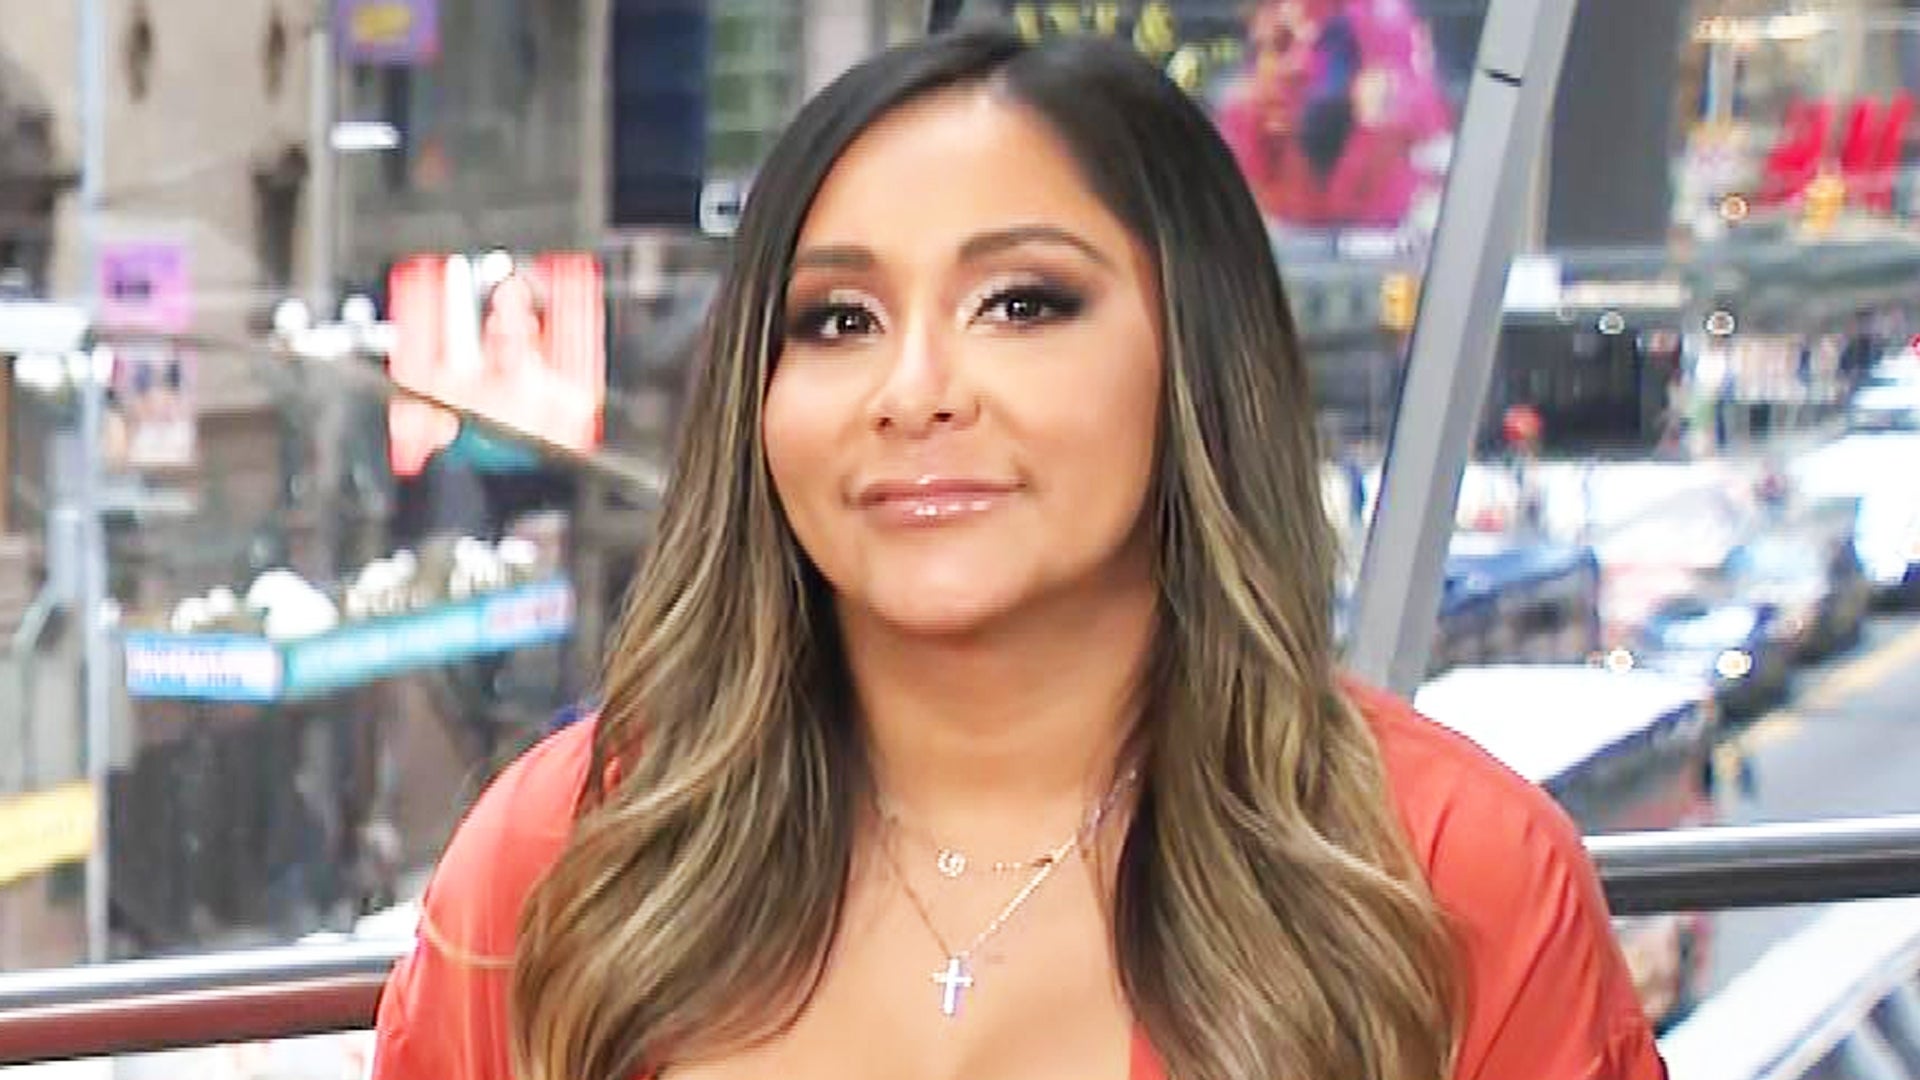 Reality TV star Snooki says she's quitting 'Jersey Shore